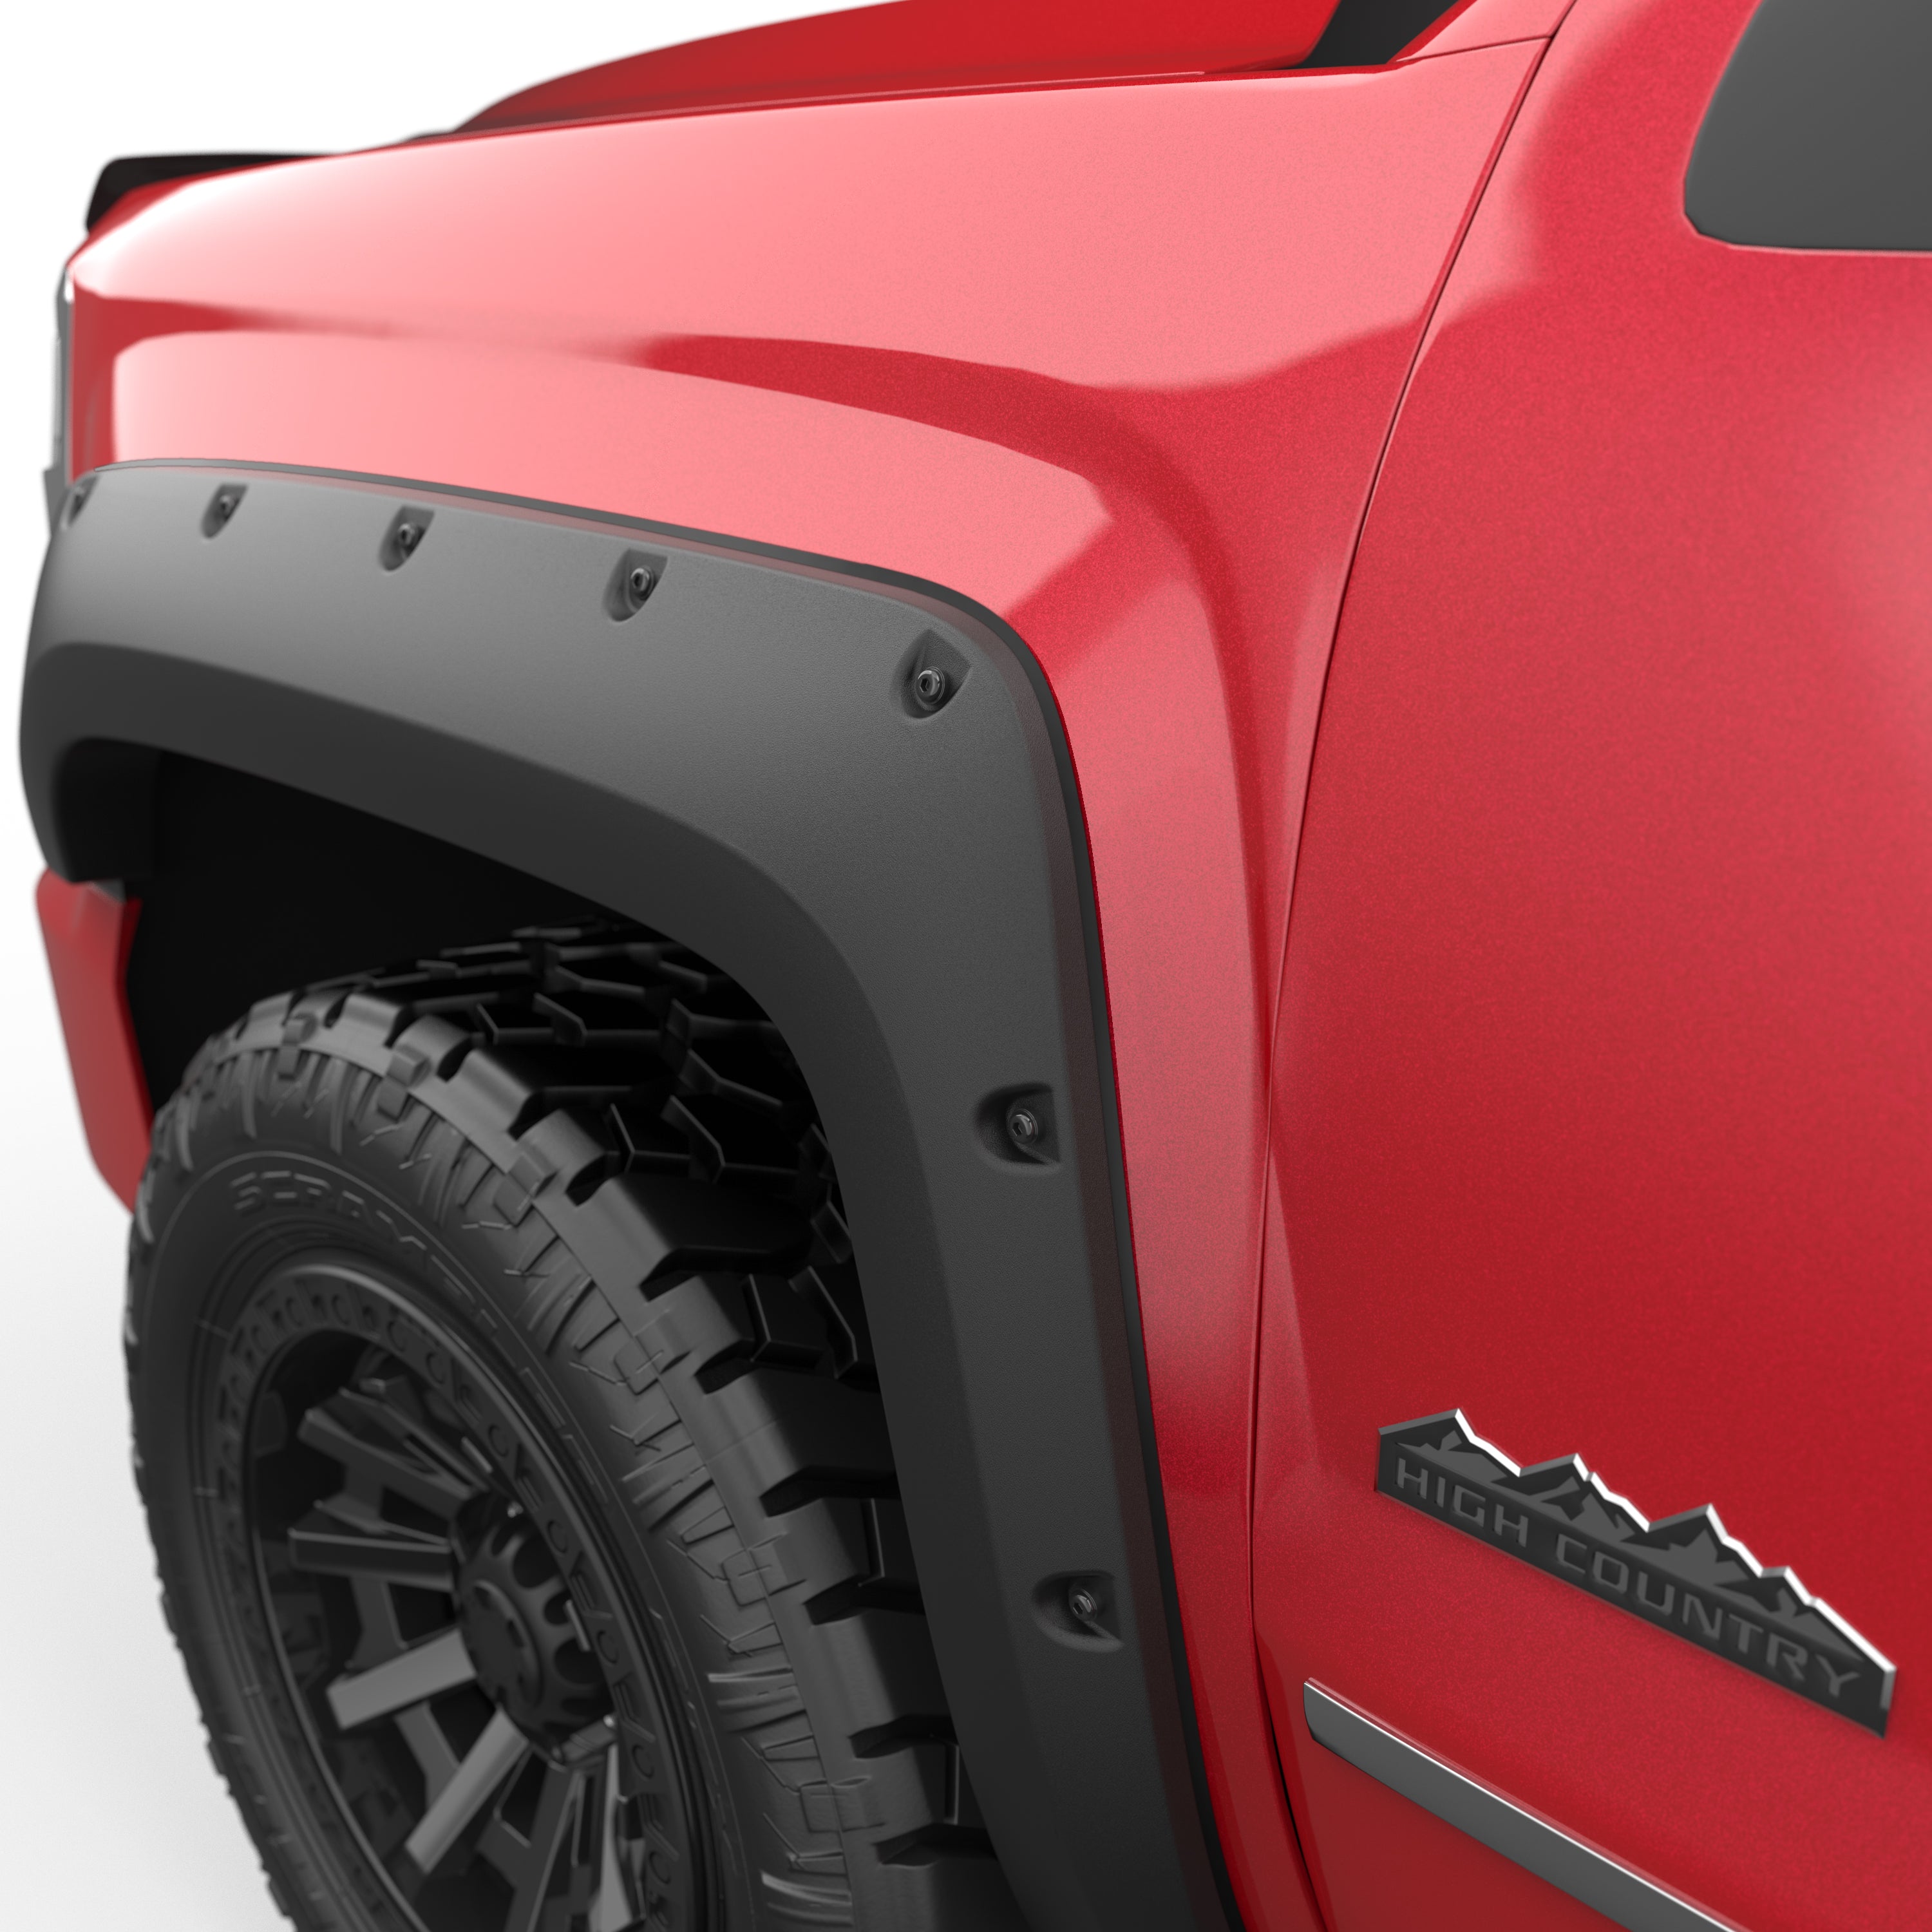 EGR Traditional Bolt-on look Fender Flares with Black-out Bolt Kit  14-18 Chevrolet Silverado 1500 Short Box Only set of 4